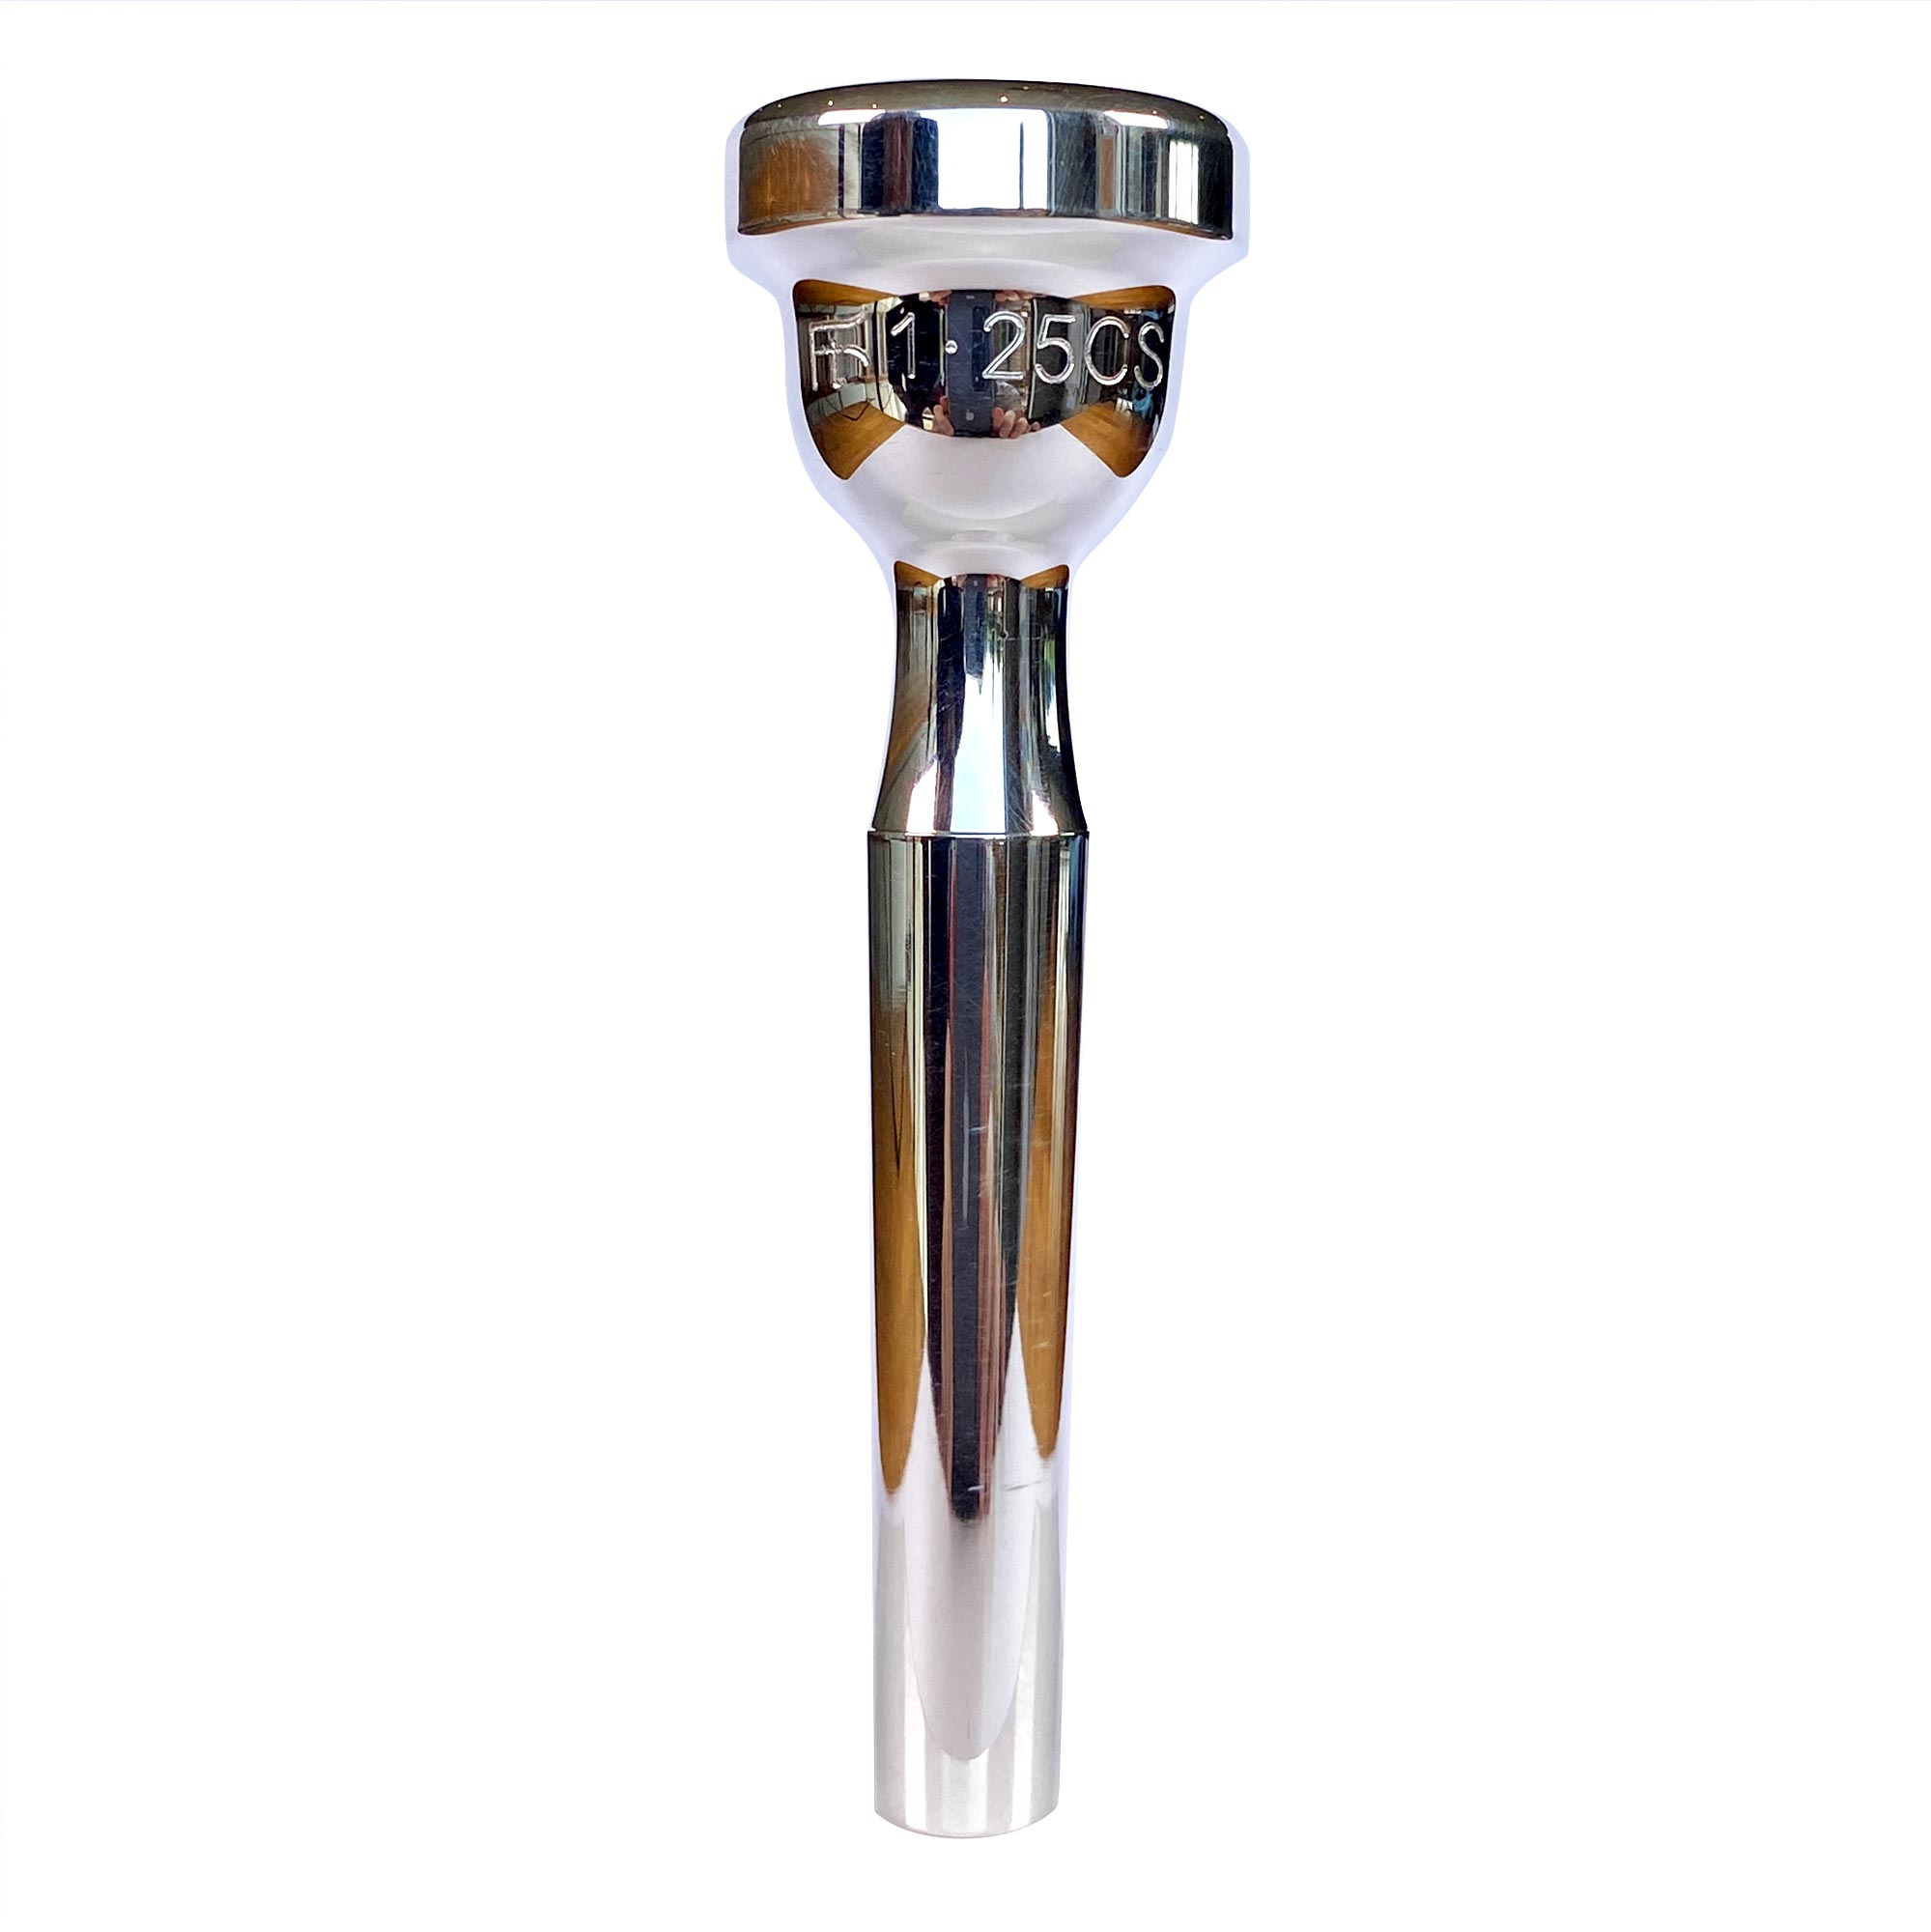 Fultone Brass - Ft Series Mouthpieces - Classic Series - Ft 1.25 CS Mouthpiece